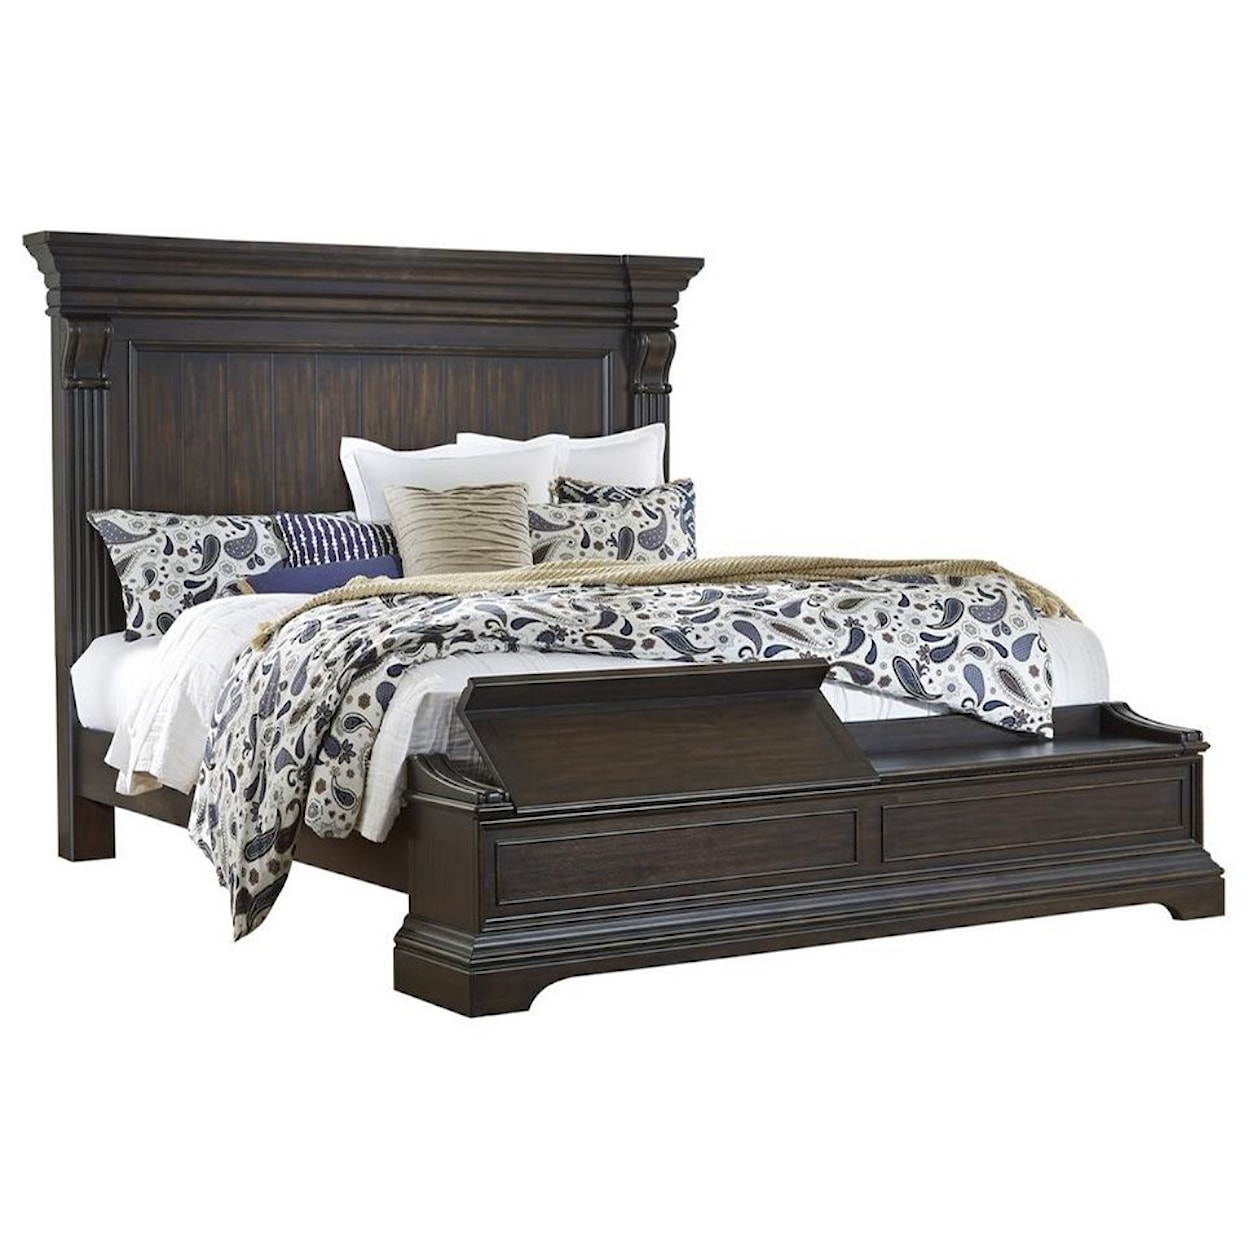 Pulaski Furniture Caldwell Queen Bed with Blanket Chest